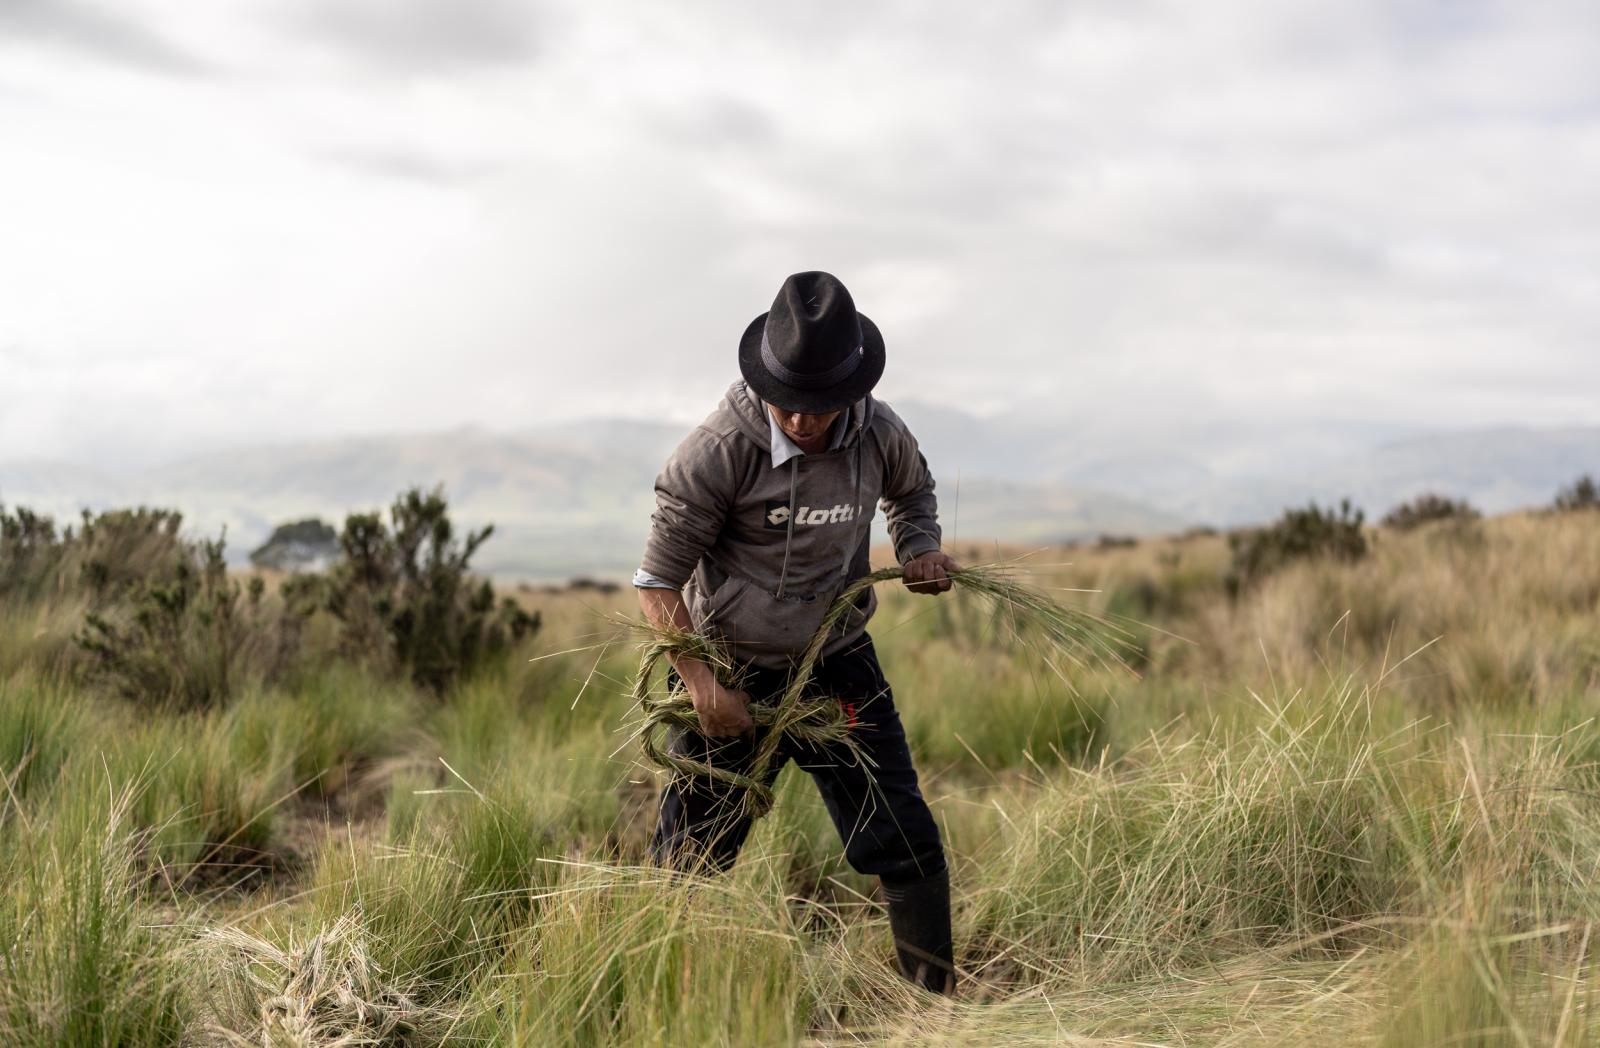 Juan collects the grasses and t...Yader Guzman/The Globe and Mail